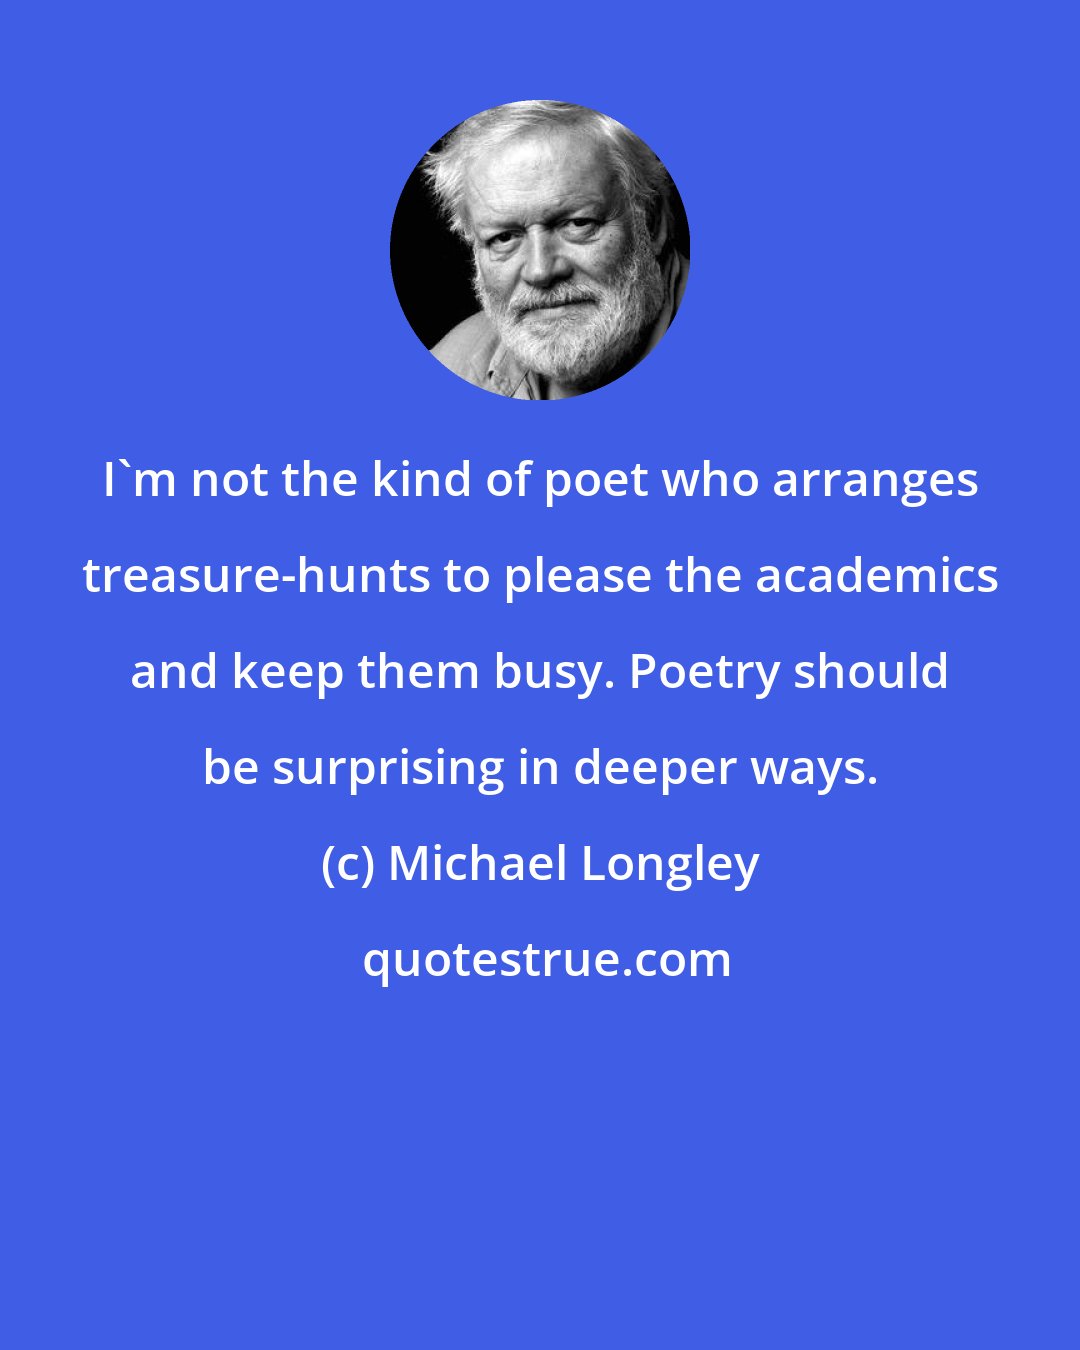 Michael Longley: I'm not the kind of poet who arranges treasure-hunts to please the academics and keep them busy. Poetry should be surprising in deeper ways.